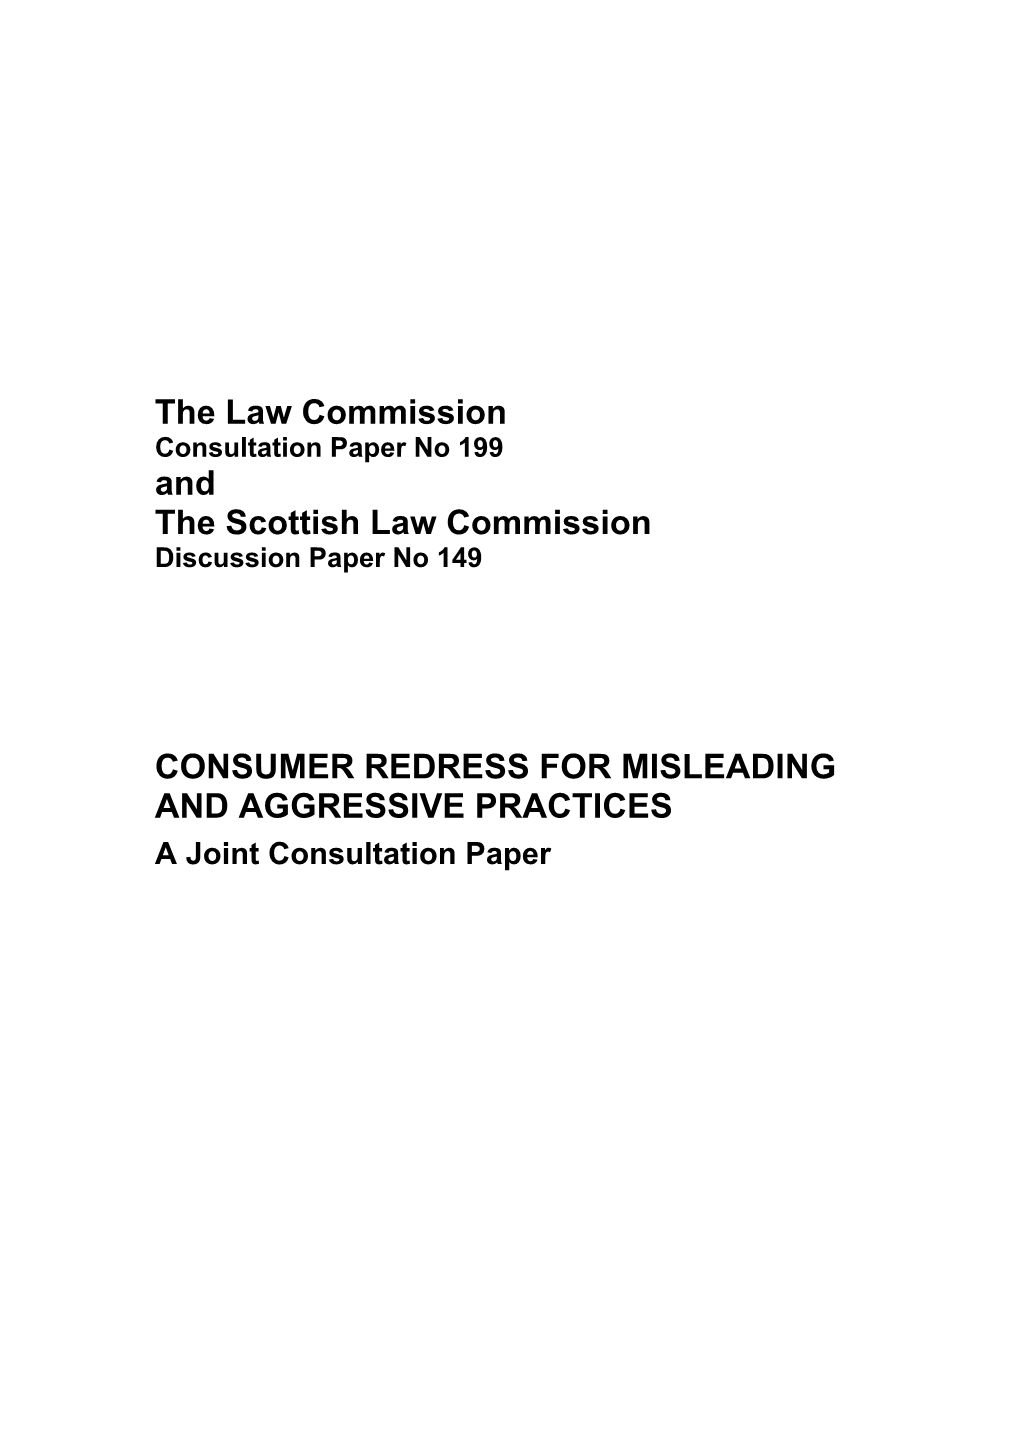 CONSUMER REDRESS for MISLEADING and AGGRESSIVE PRACTICES a Joint Consultation Paper